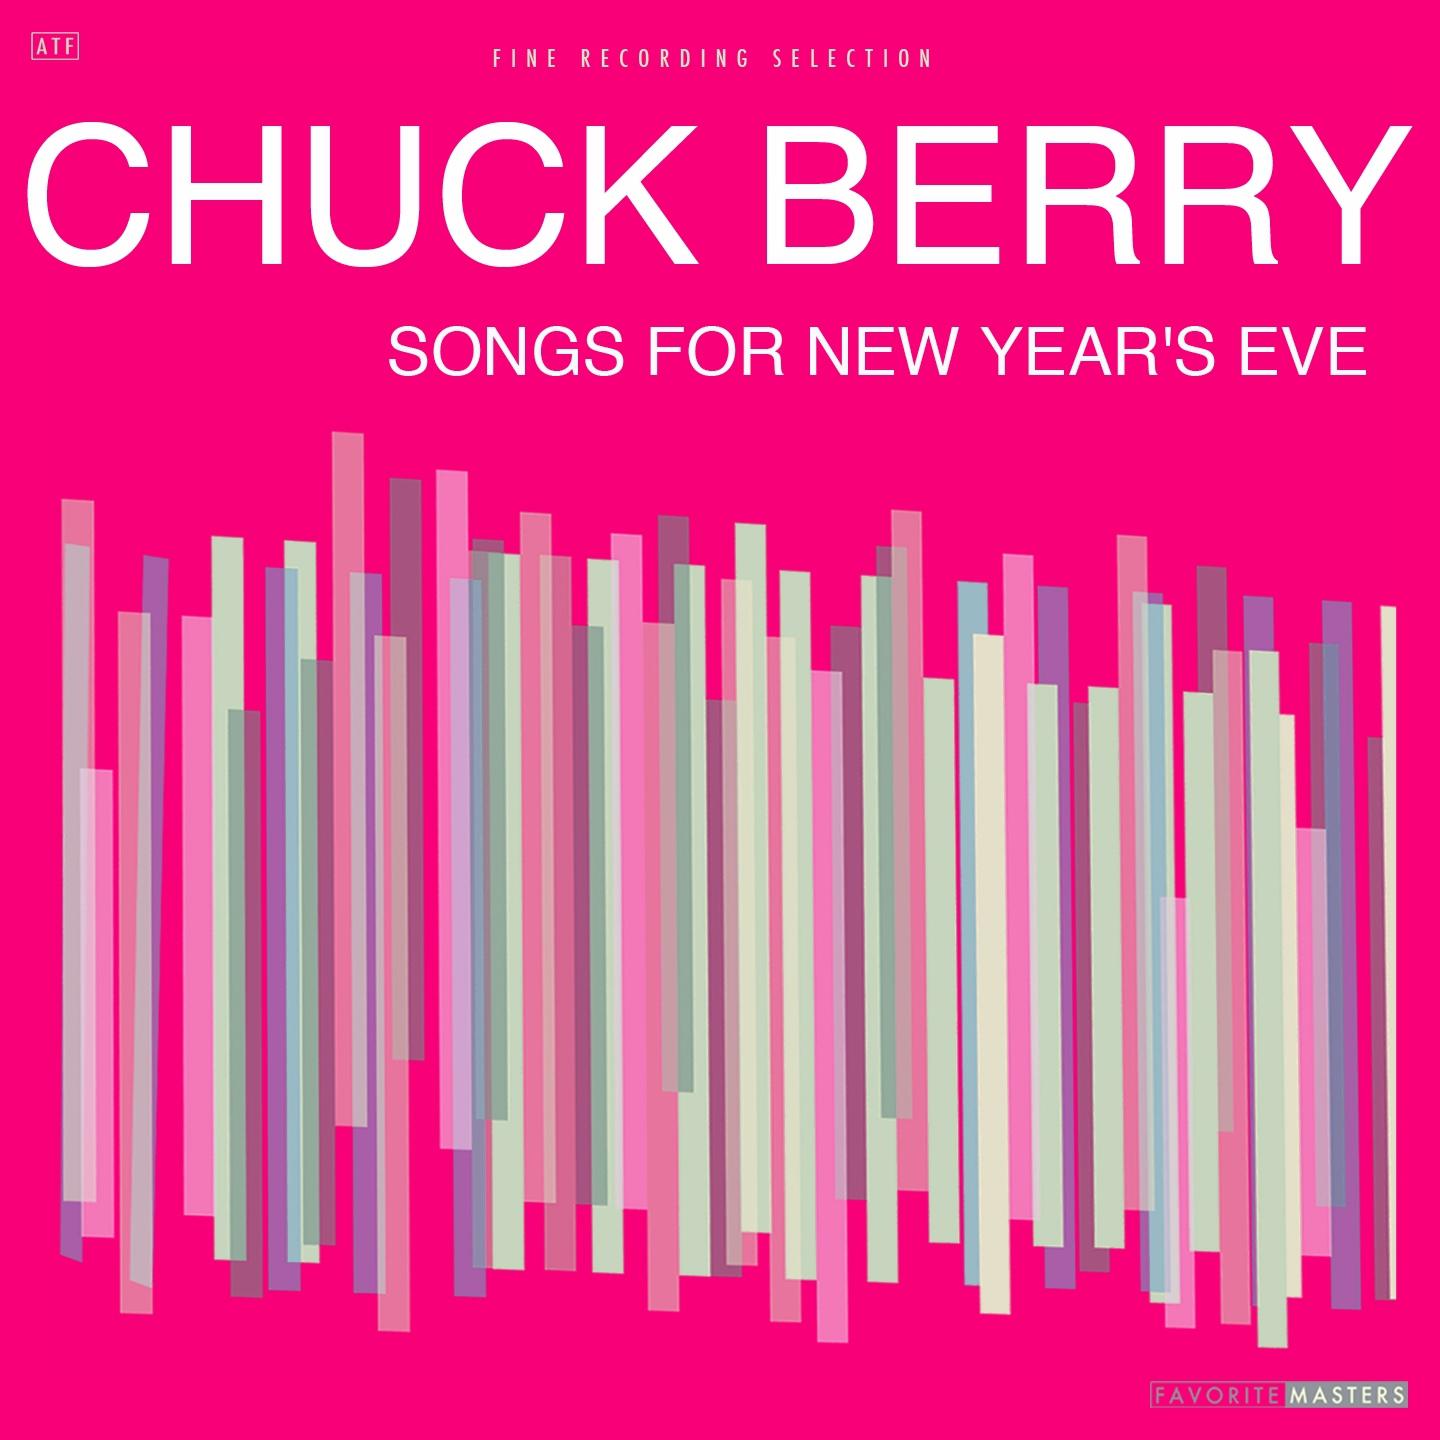 Songs for New Year's Eve